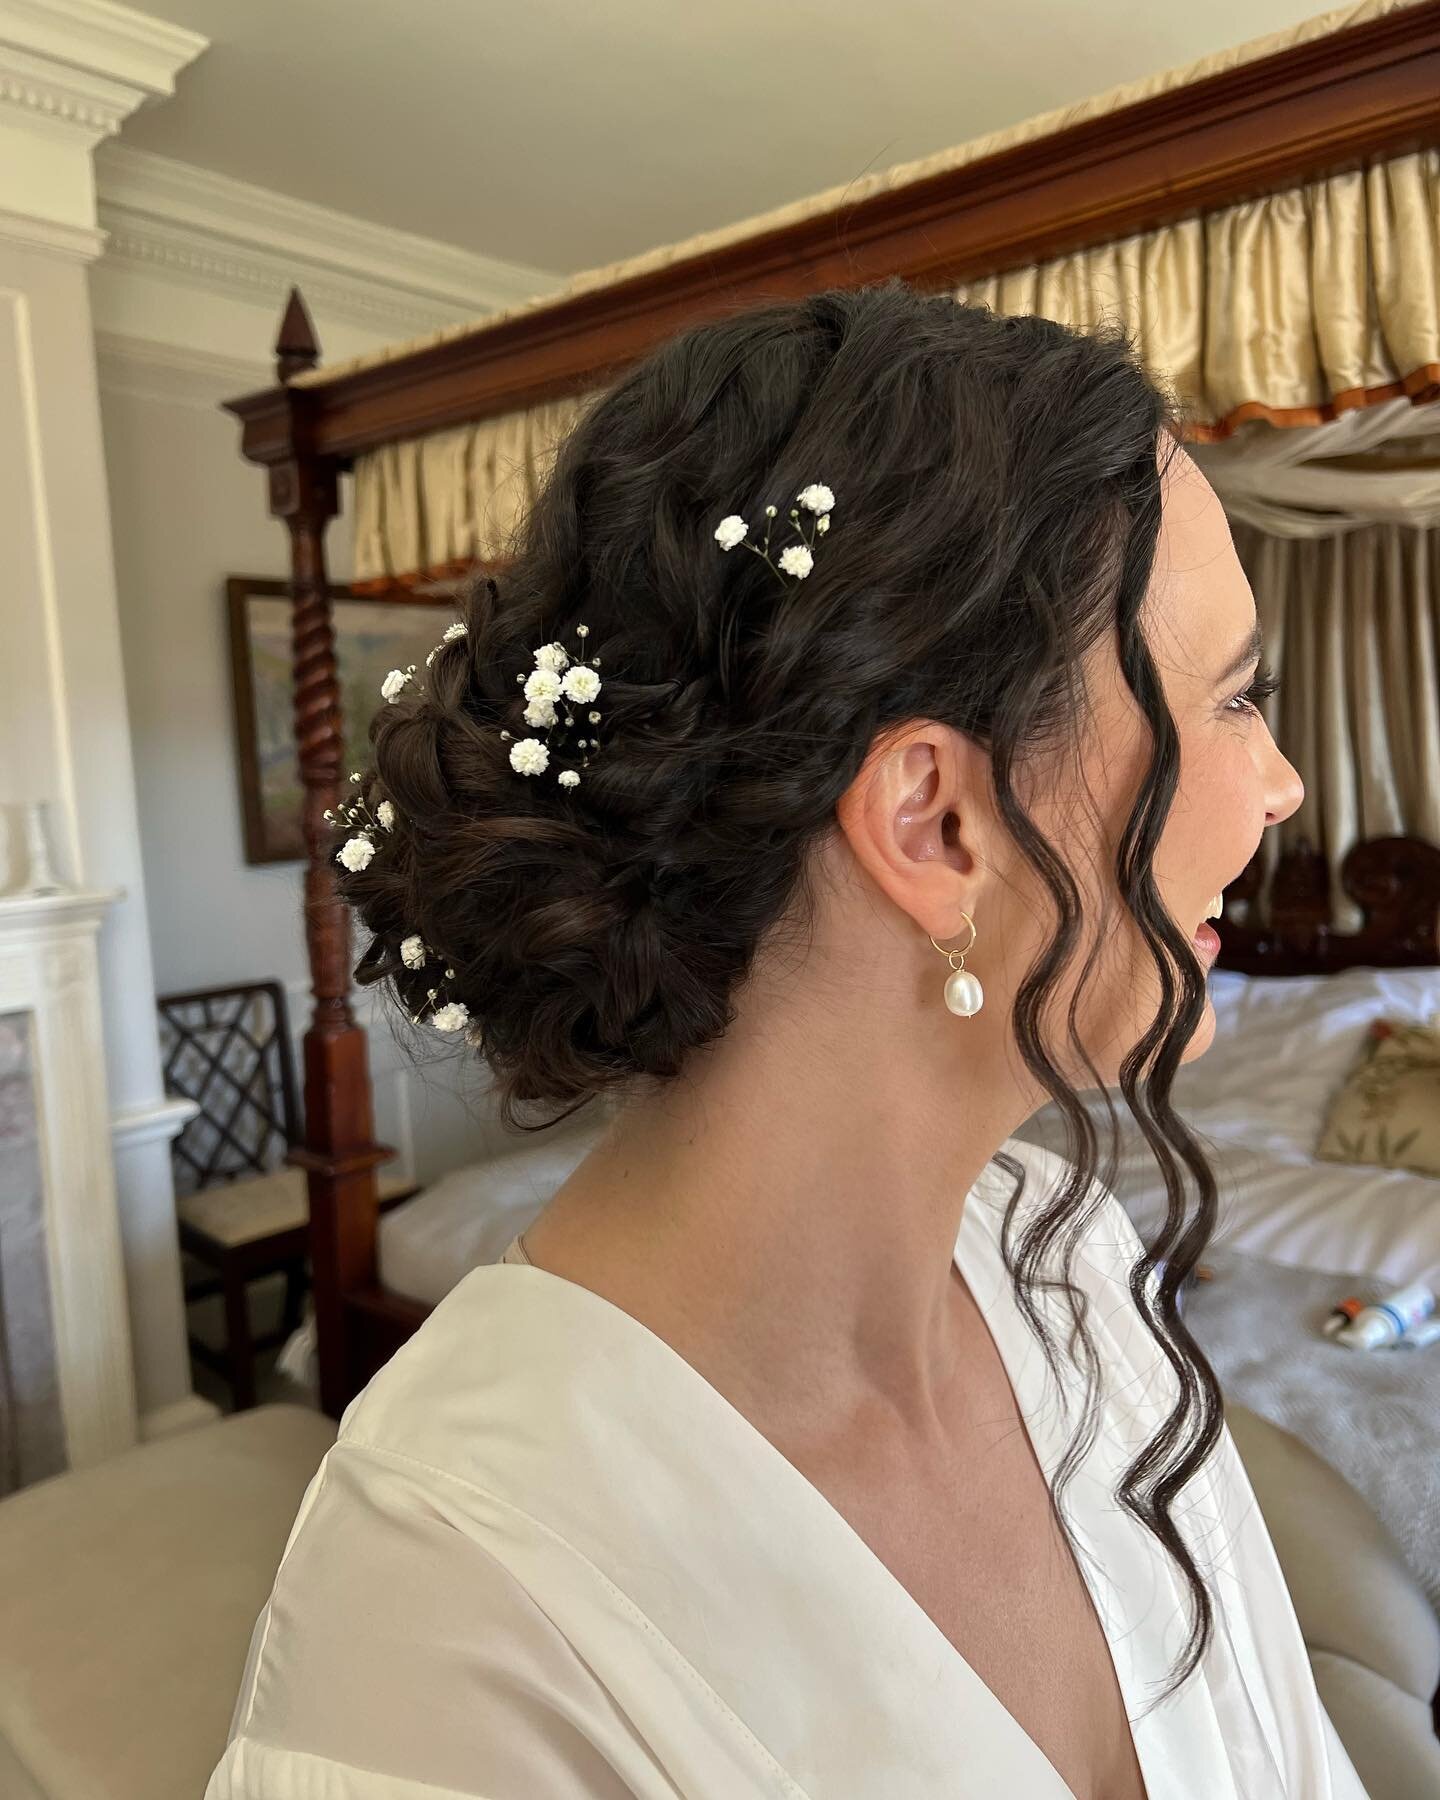 Absolute beauty Teifi 🦋 such a lovely morning spent doing your hair and make up at gorgeous @pentilliecastleweddings 

#cornwallwedding #cornwallmakeupartist #cornwallhairstylist #bridalhair #bridalmakeup #naturalbeauty #bridalupdo